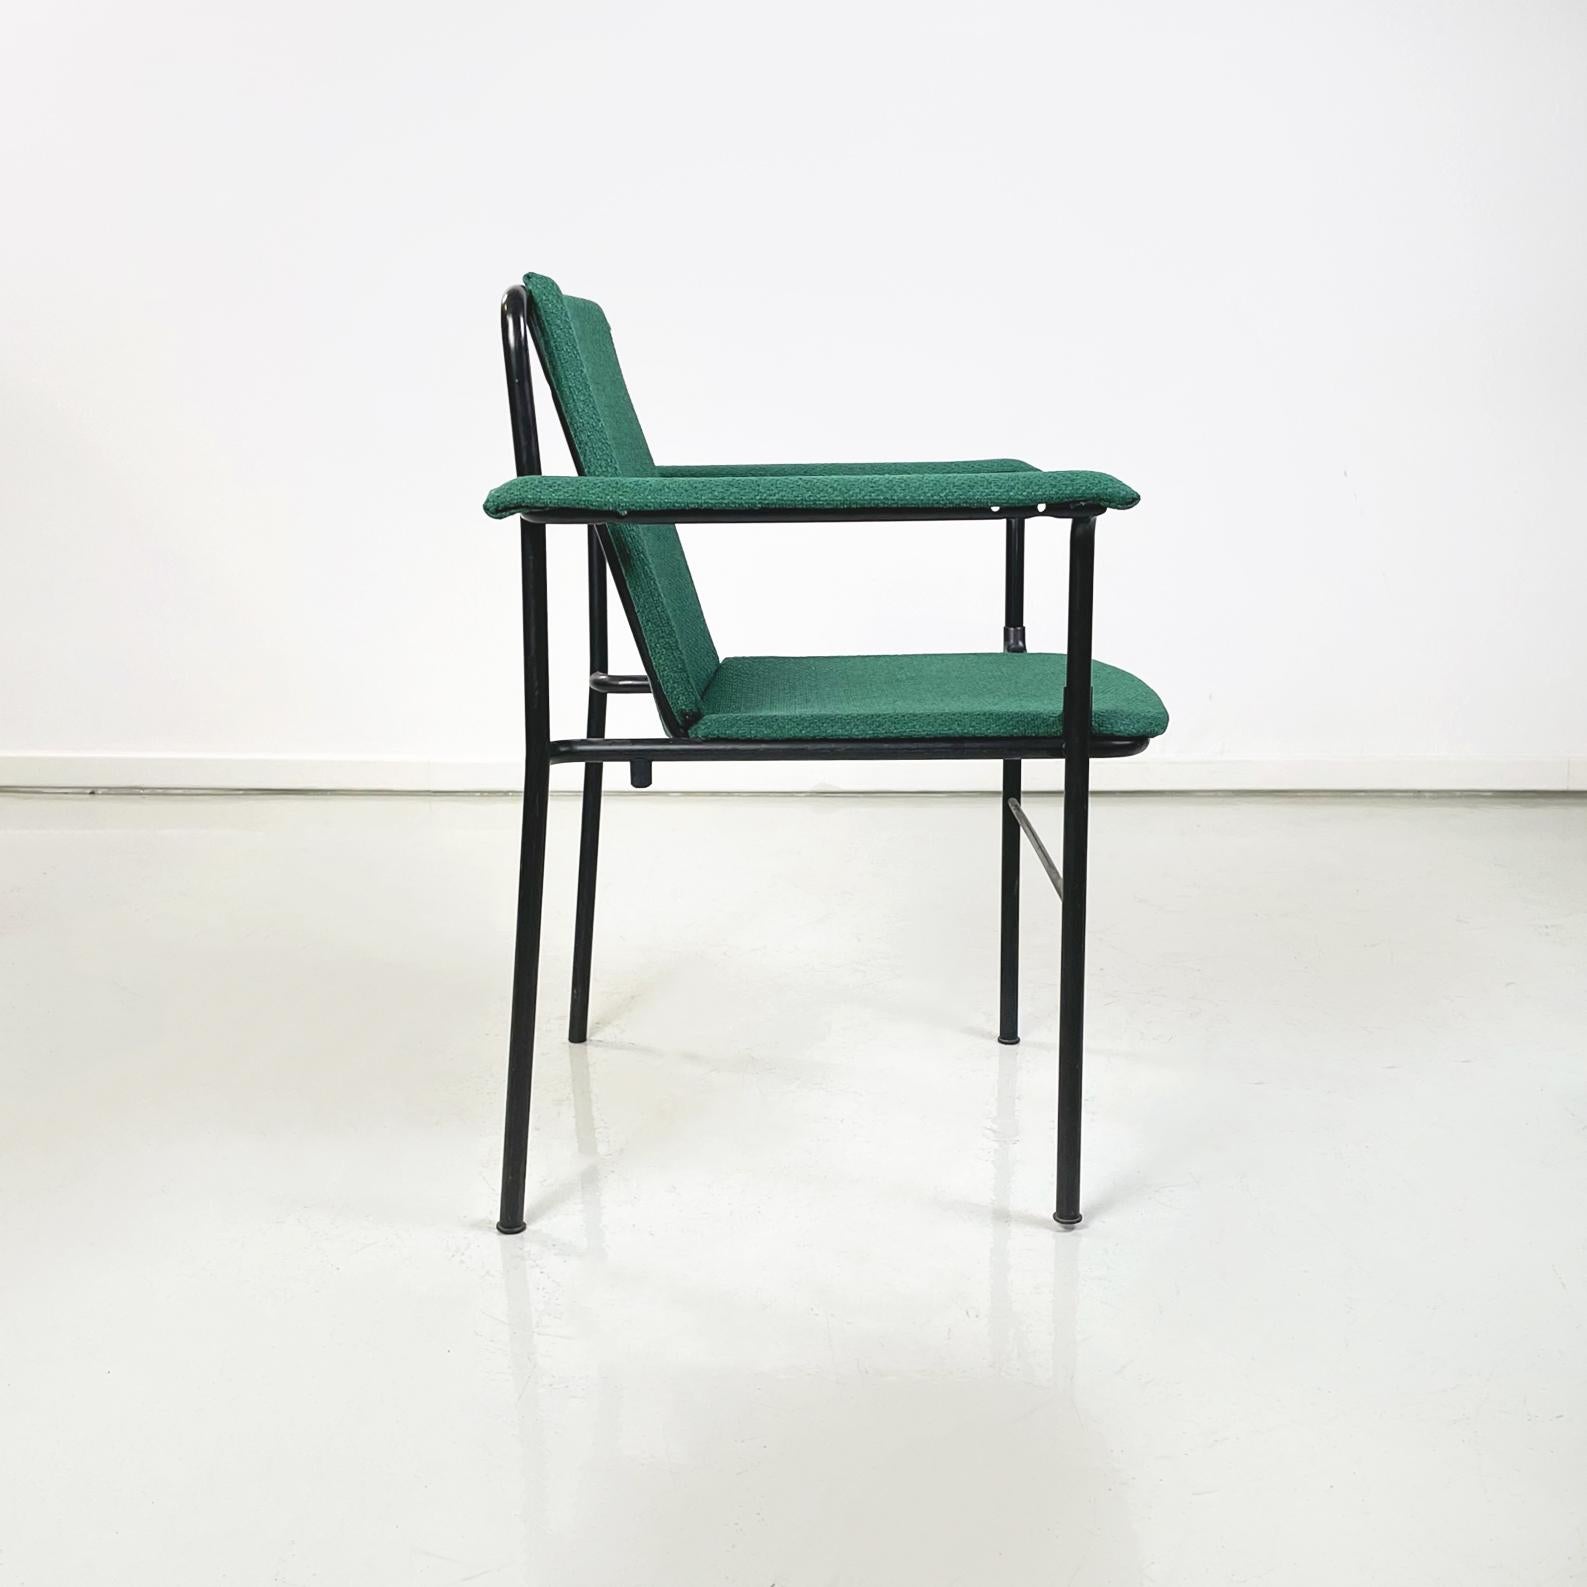 Italian Modern Armchairs Movie Chair by Mario Marenco for Poltrona Frau, 1980s In Good Condition For Sale In MIlano, IT